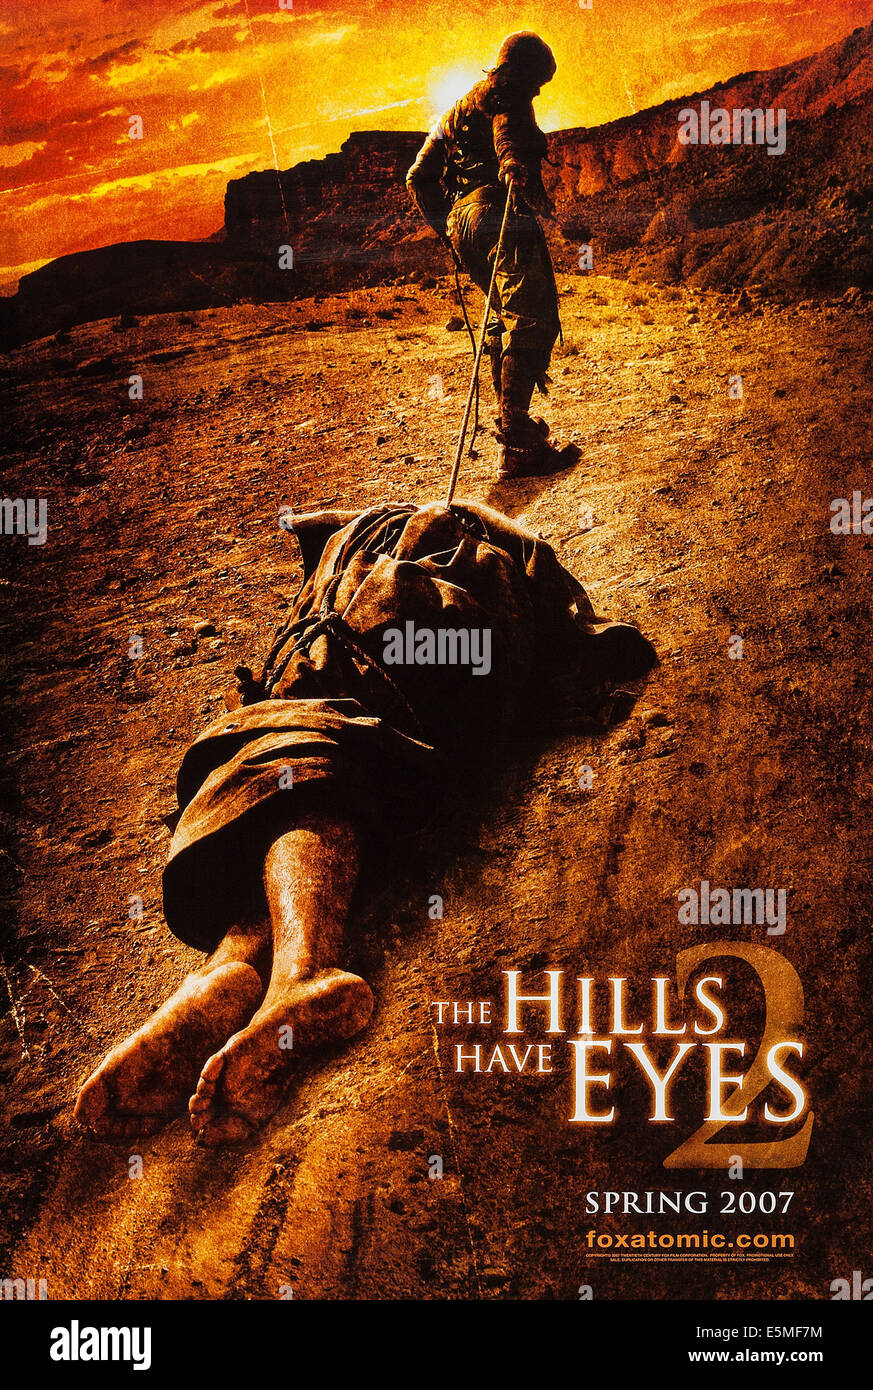 THE HILLS HAVE EYES 2, US advance poster art, 2007. TM and Copyright ©20th Century Fox Films Corp. All rights Stock Photo